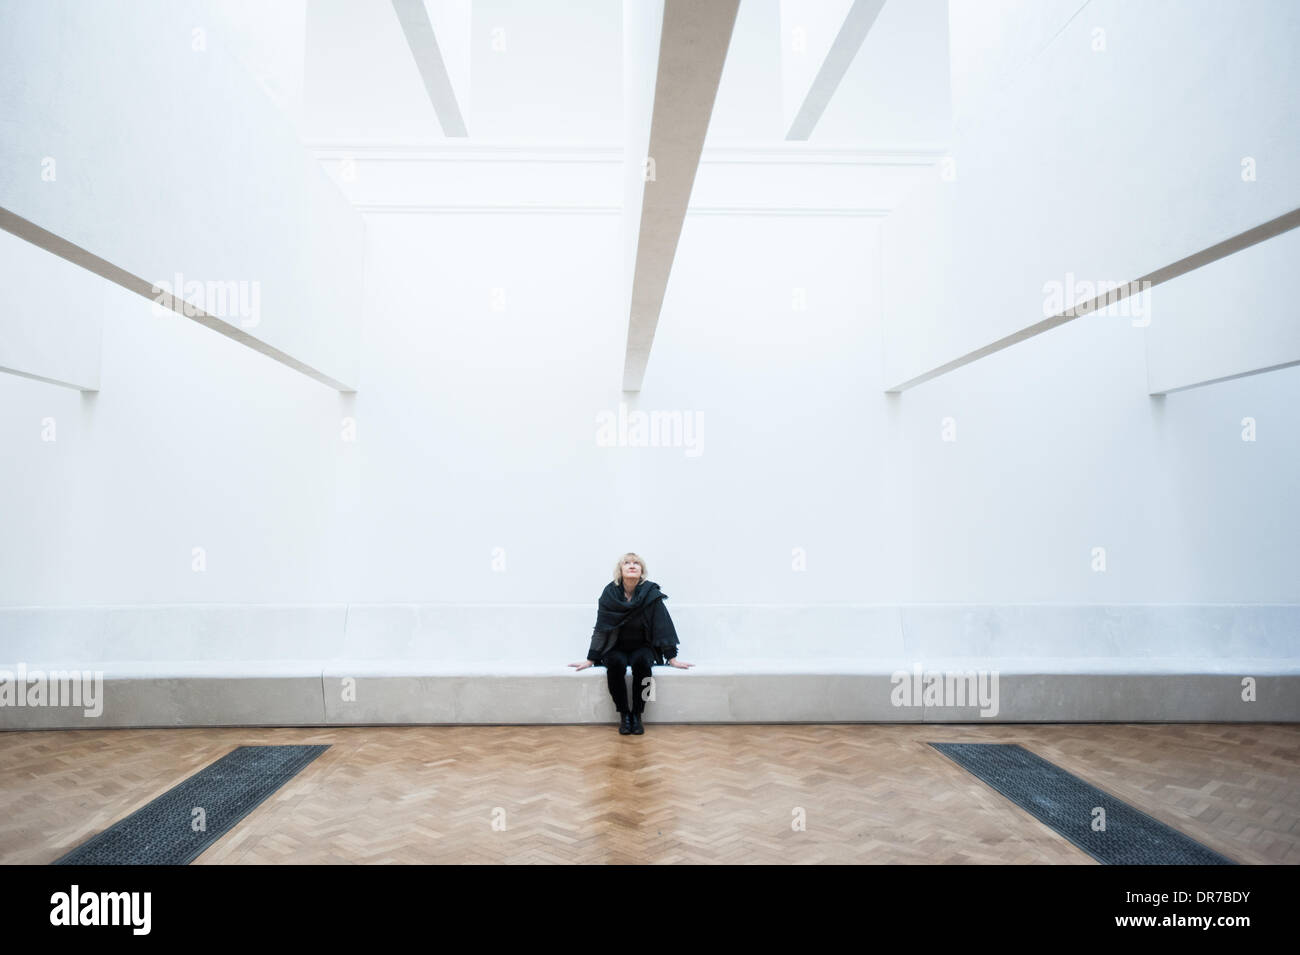 London, UK - 21 January 2014: architect Yvonne Farrell poses next to their installation at the Sensing Spaces: Architecture Reimagined exhibition at the Royal Academy of Art Credit: © Piero Cruciatti/Alamy Live News  Stock Photo